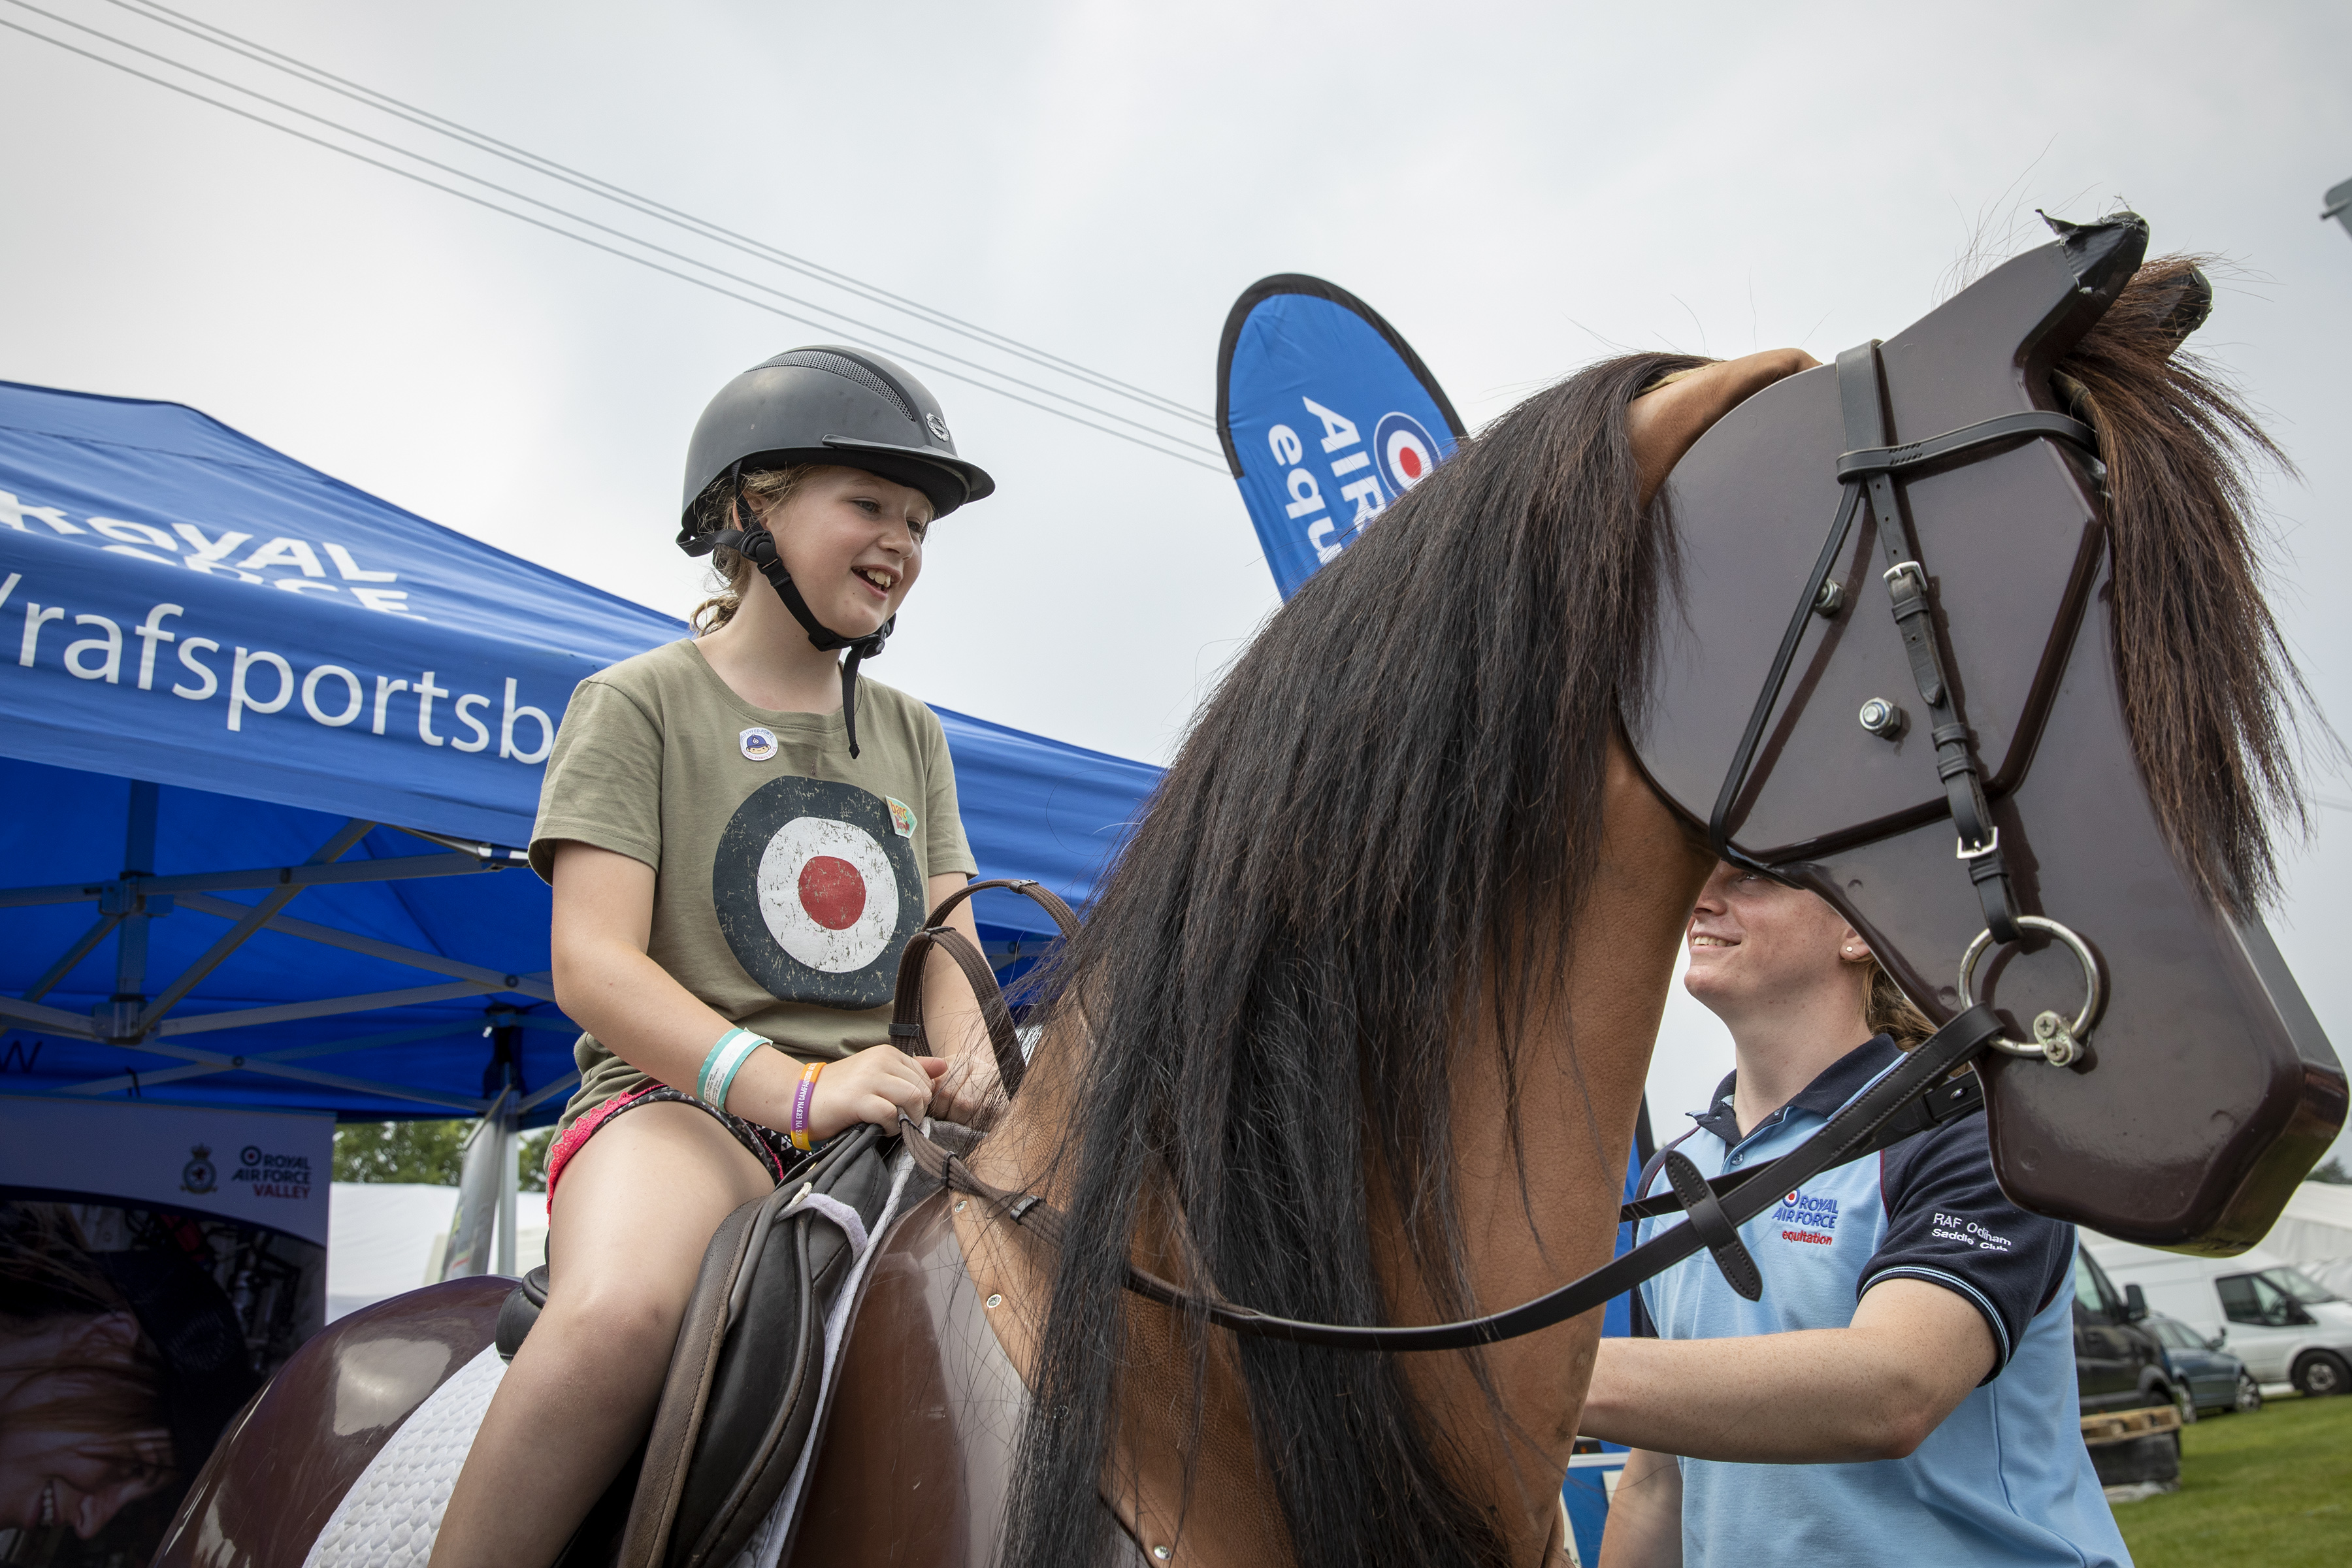 Image shows child in the seat of a horse simulator, with RAF volunteer.